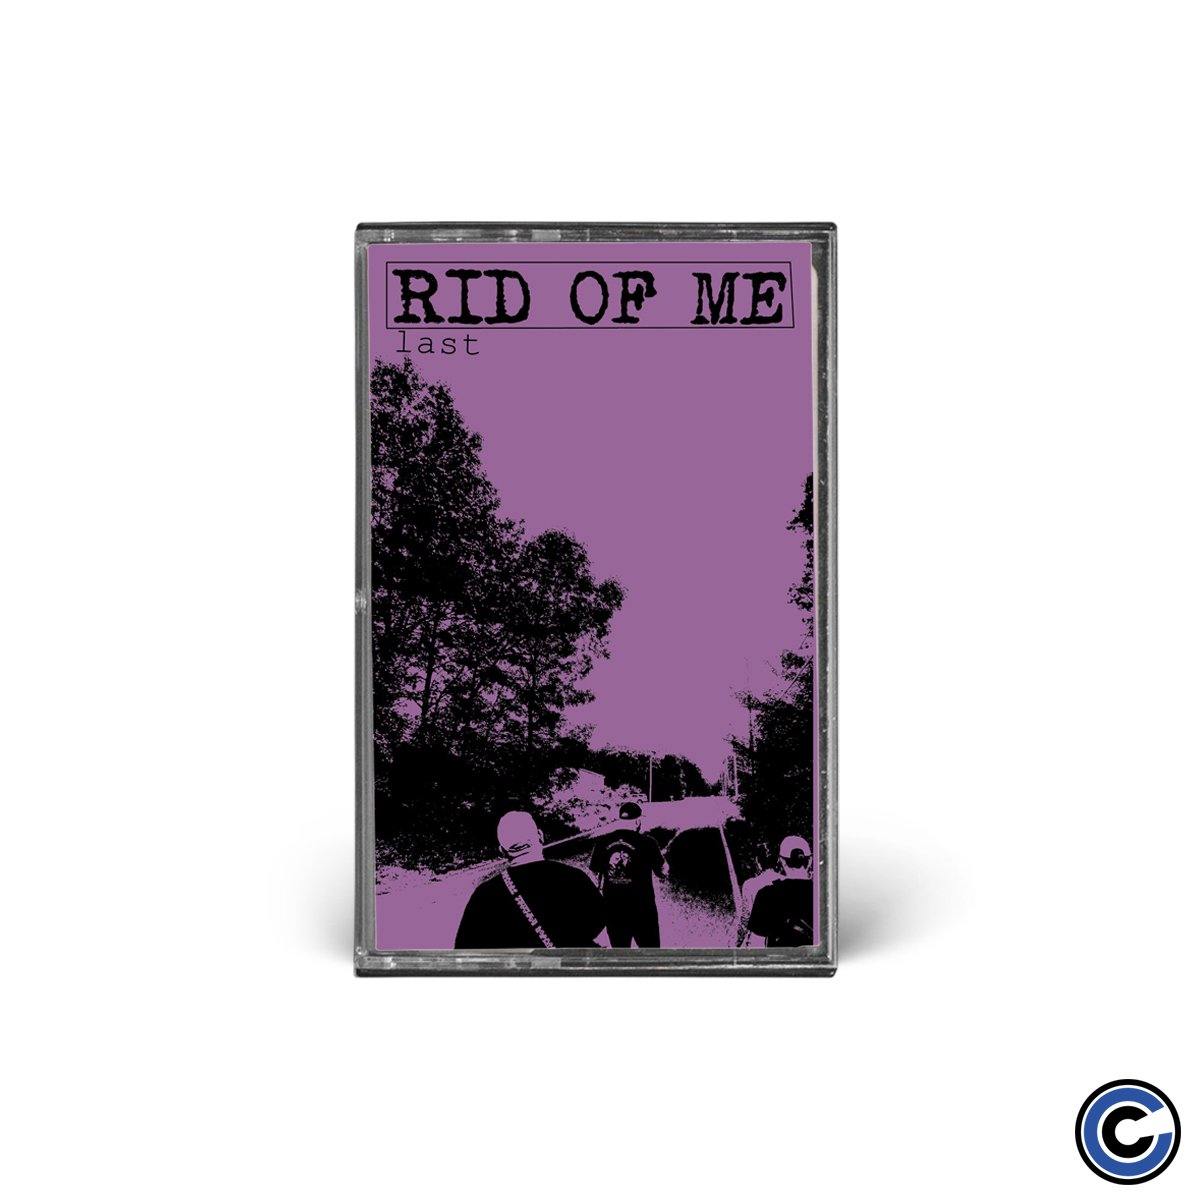 Buy – Rid Of Me "Last" Cassette – Band & Music Merch – Cold Cuts Merch